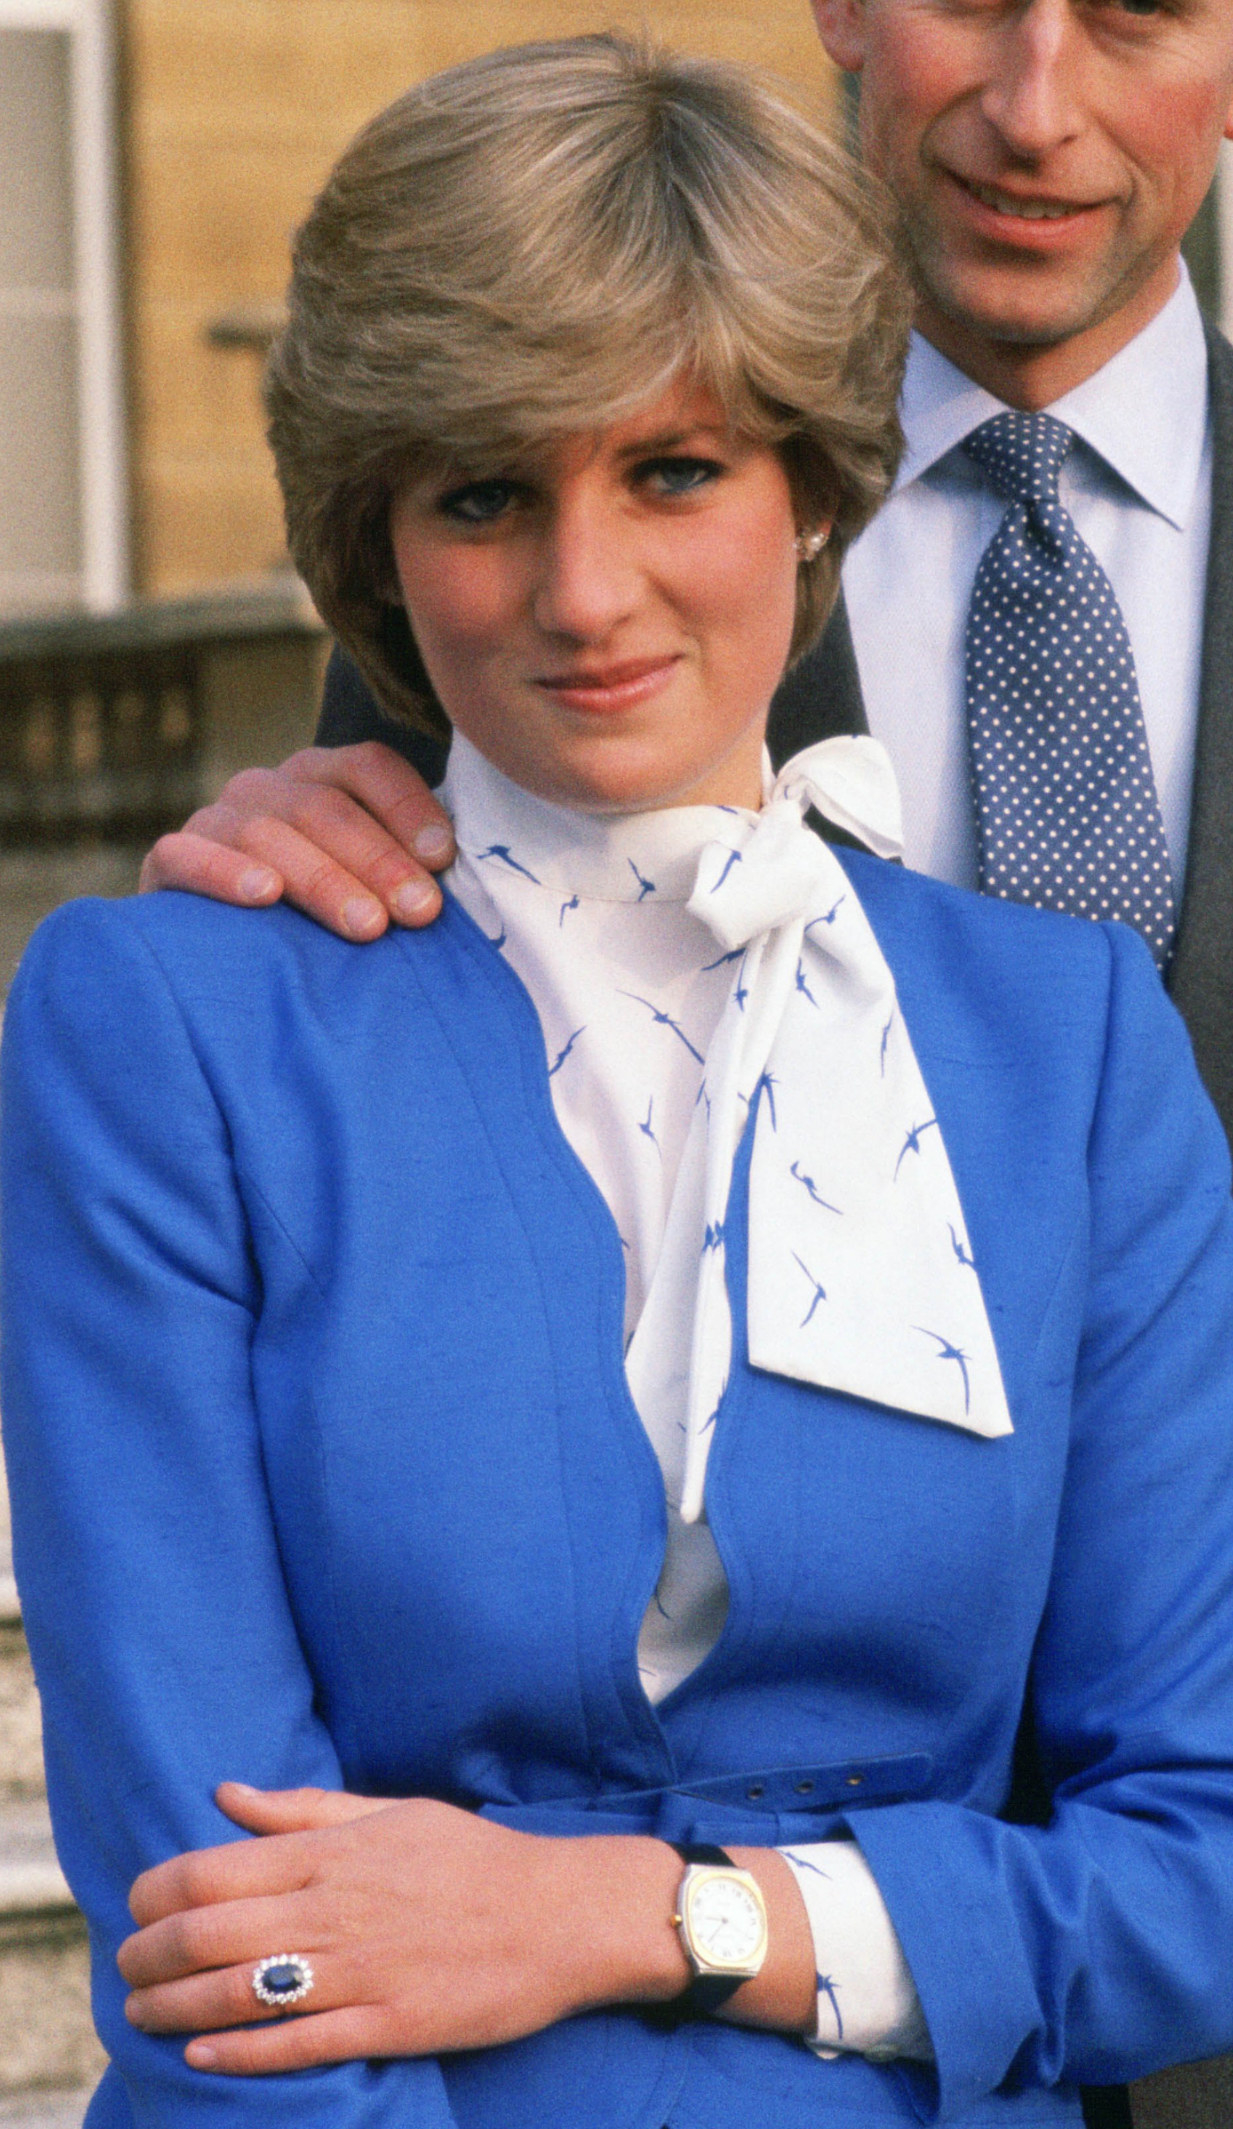 Princess Diana posing with her engagement ring and wearing a blue dress in 1981